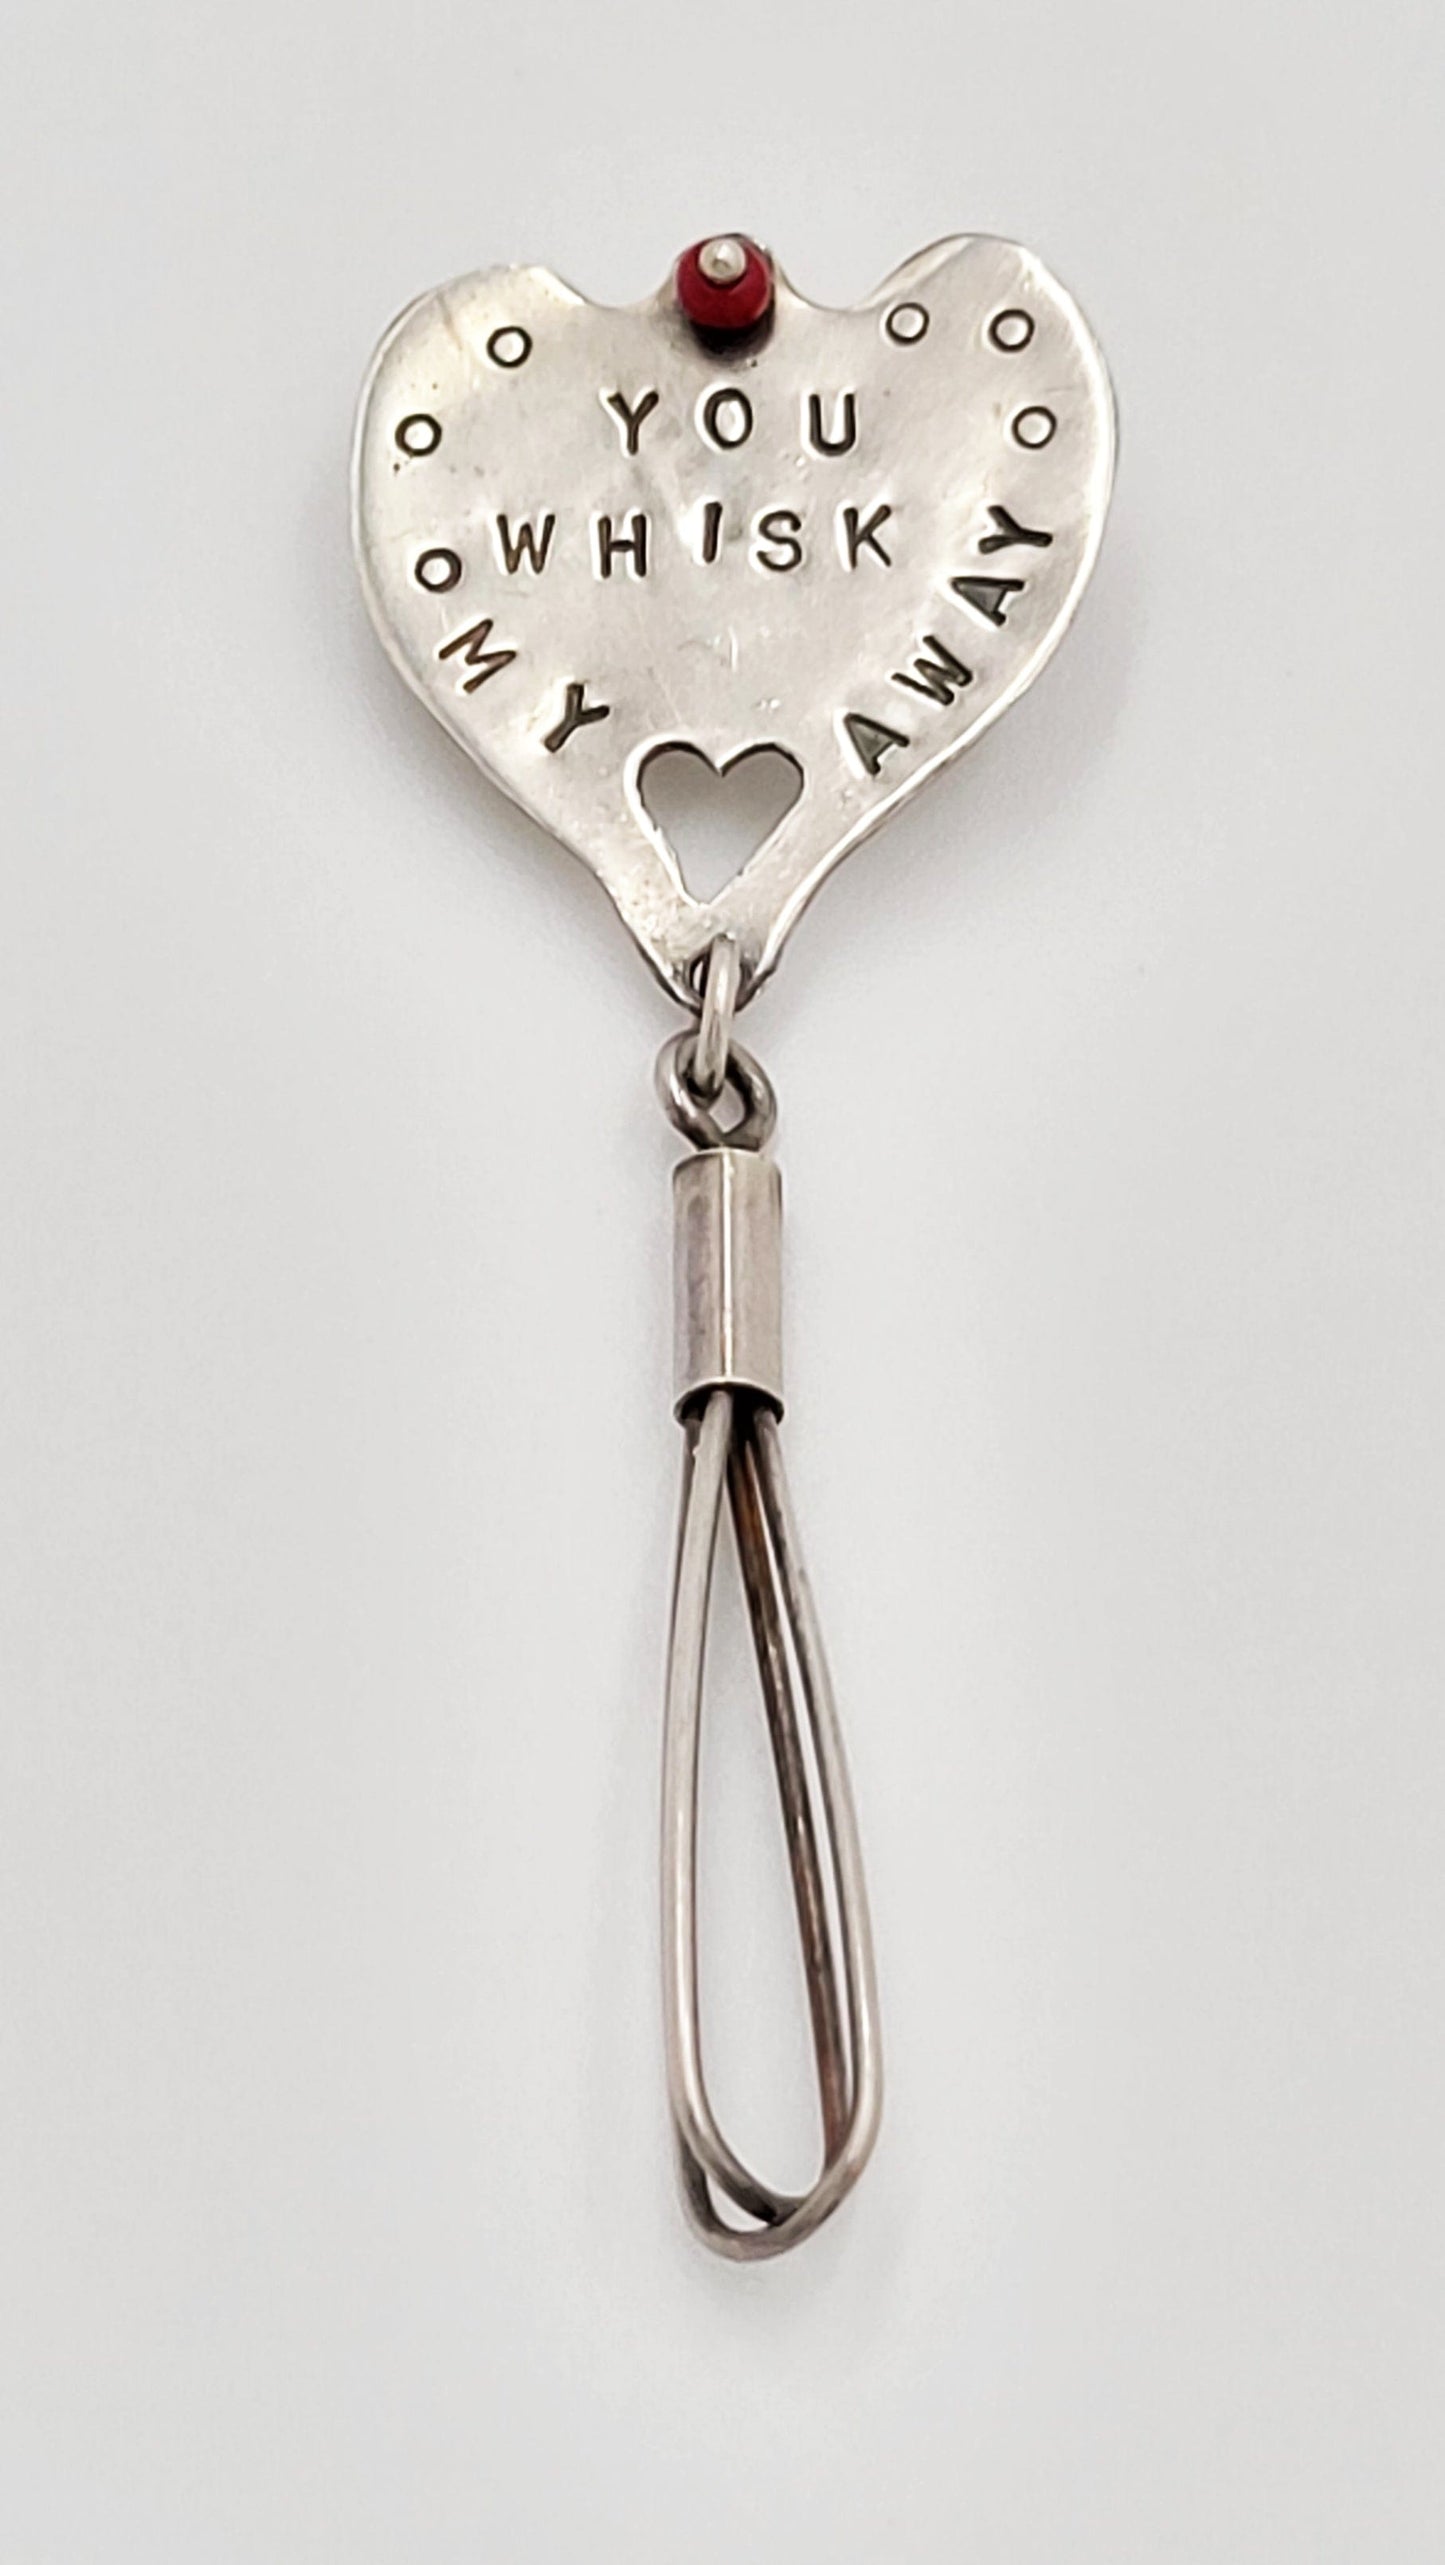 Johnson Jewelry Designer Peggy Johnson Sterling Silver "You Whisk My Heart Away" Brooch 1986